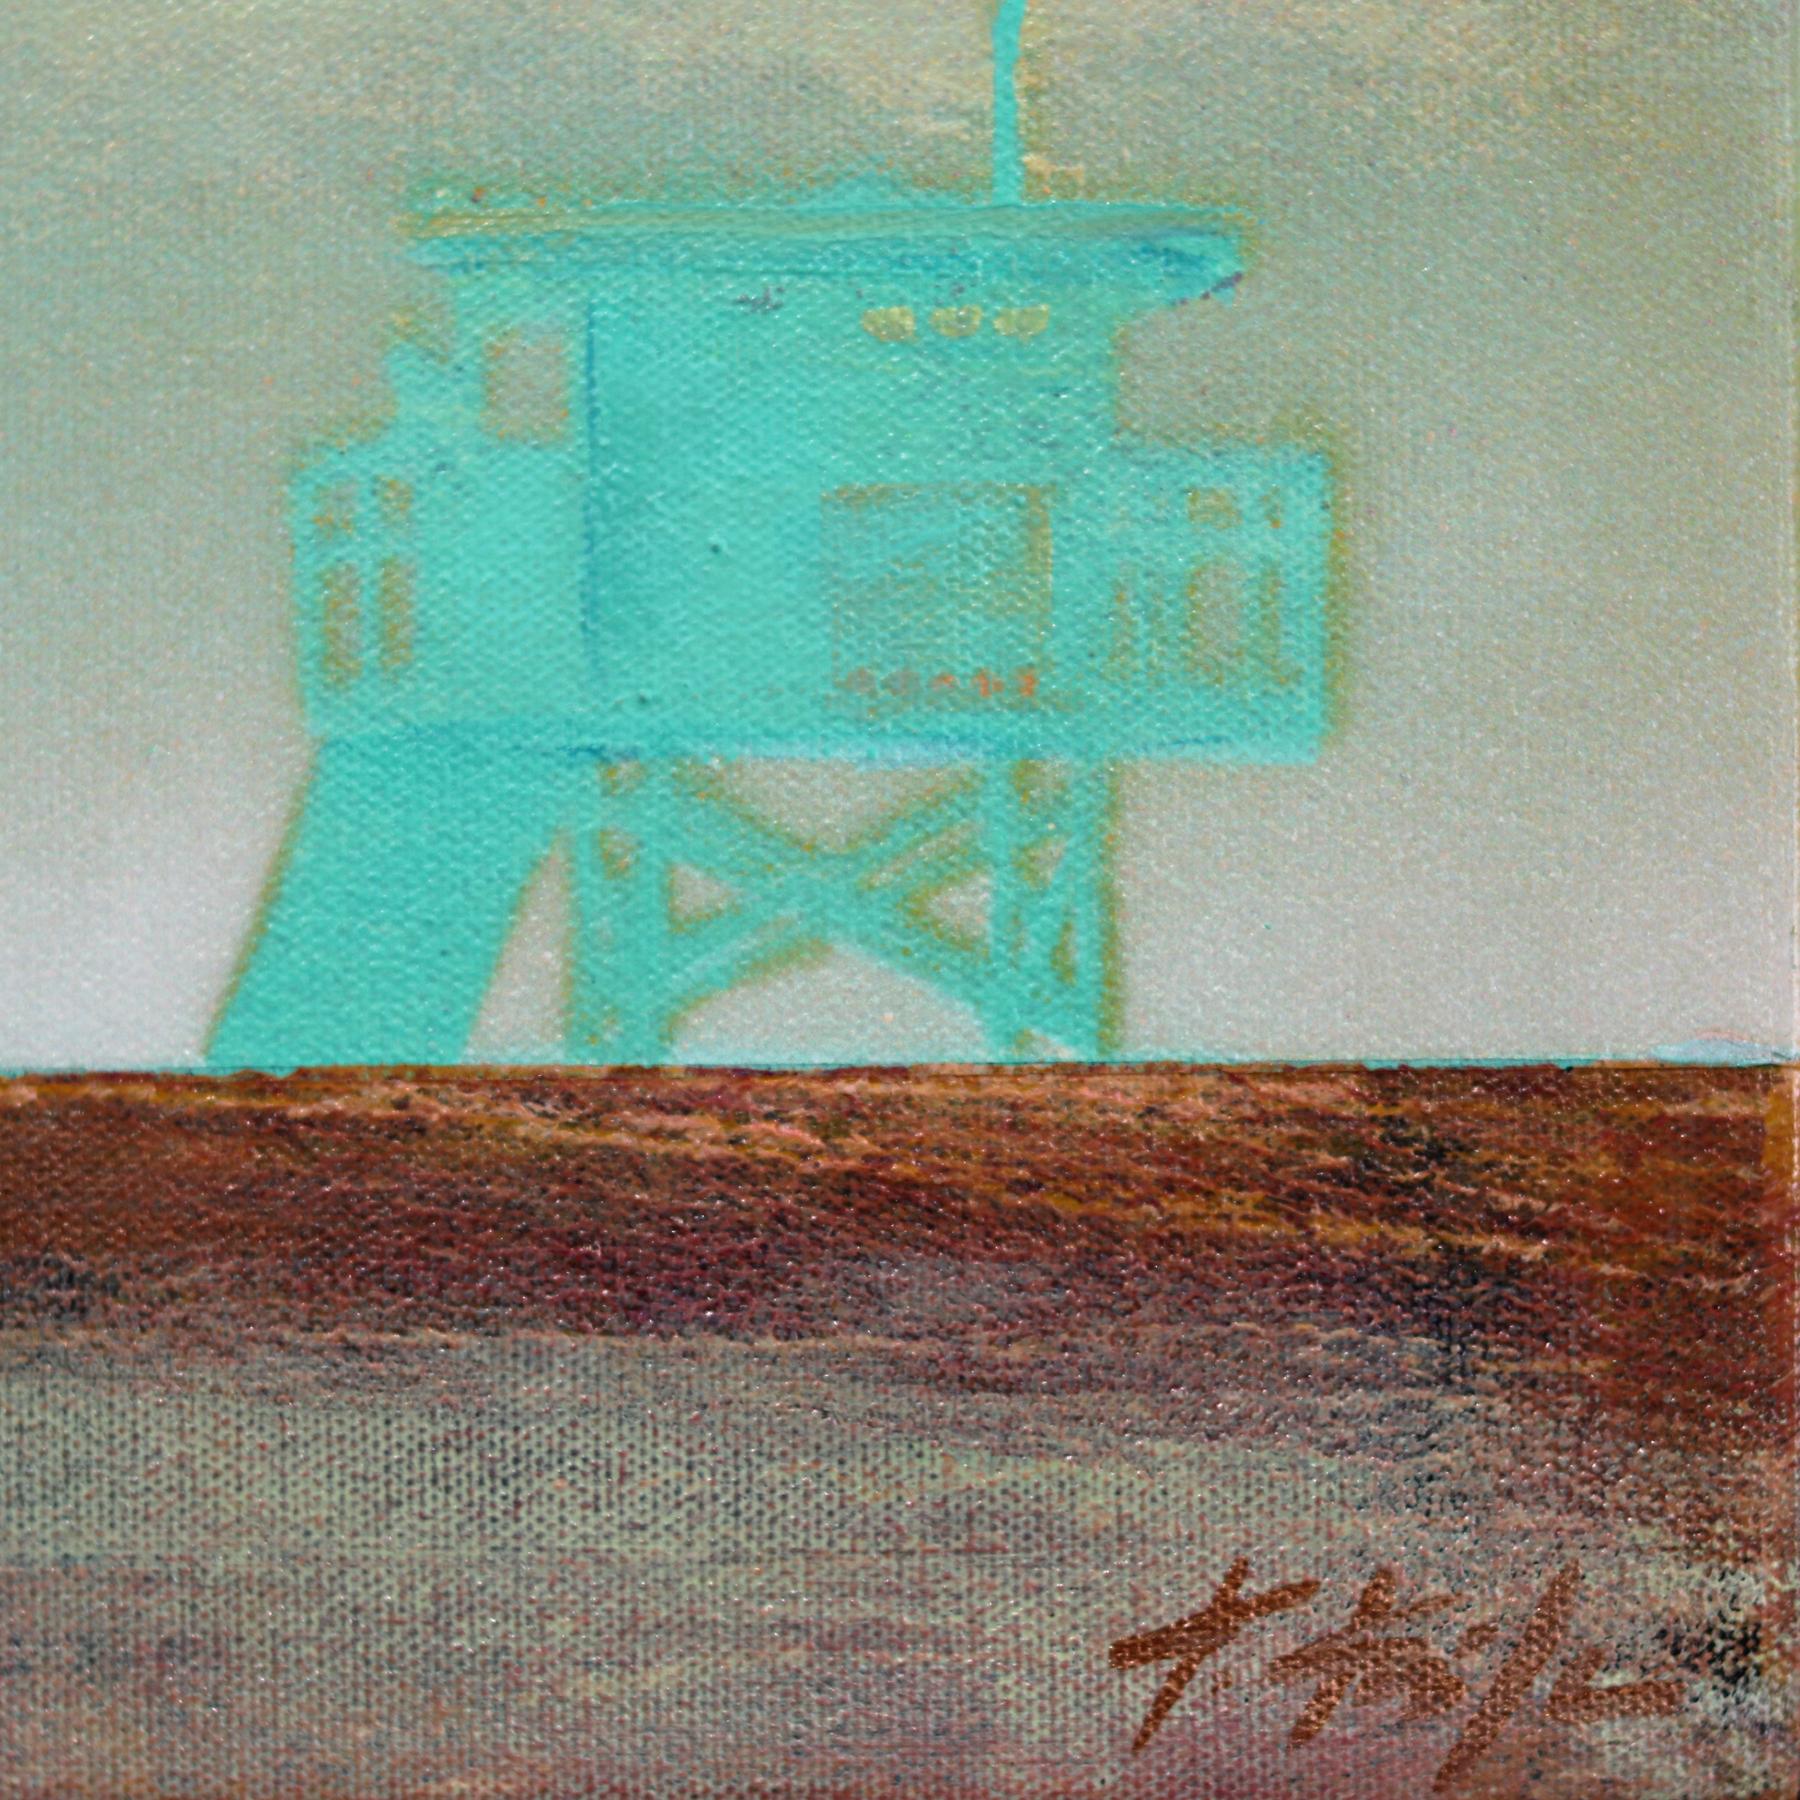 Marine Layer Lifting - Lifeguard Stand on Beach Original Oceanscape Painting For Sale 4